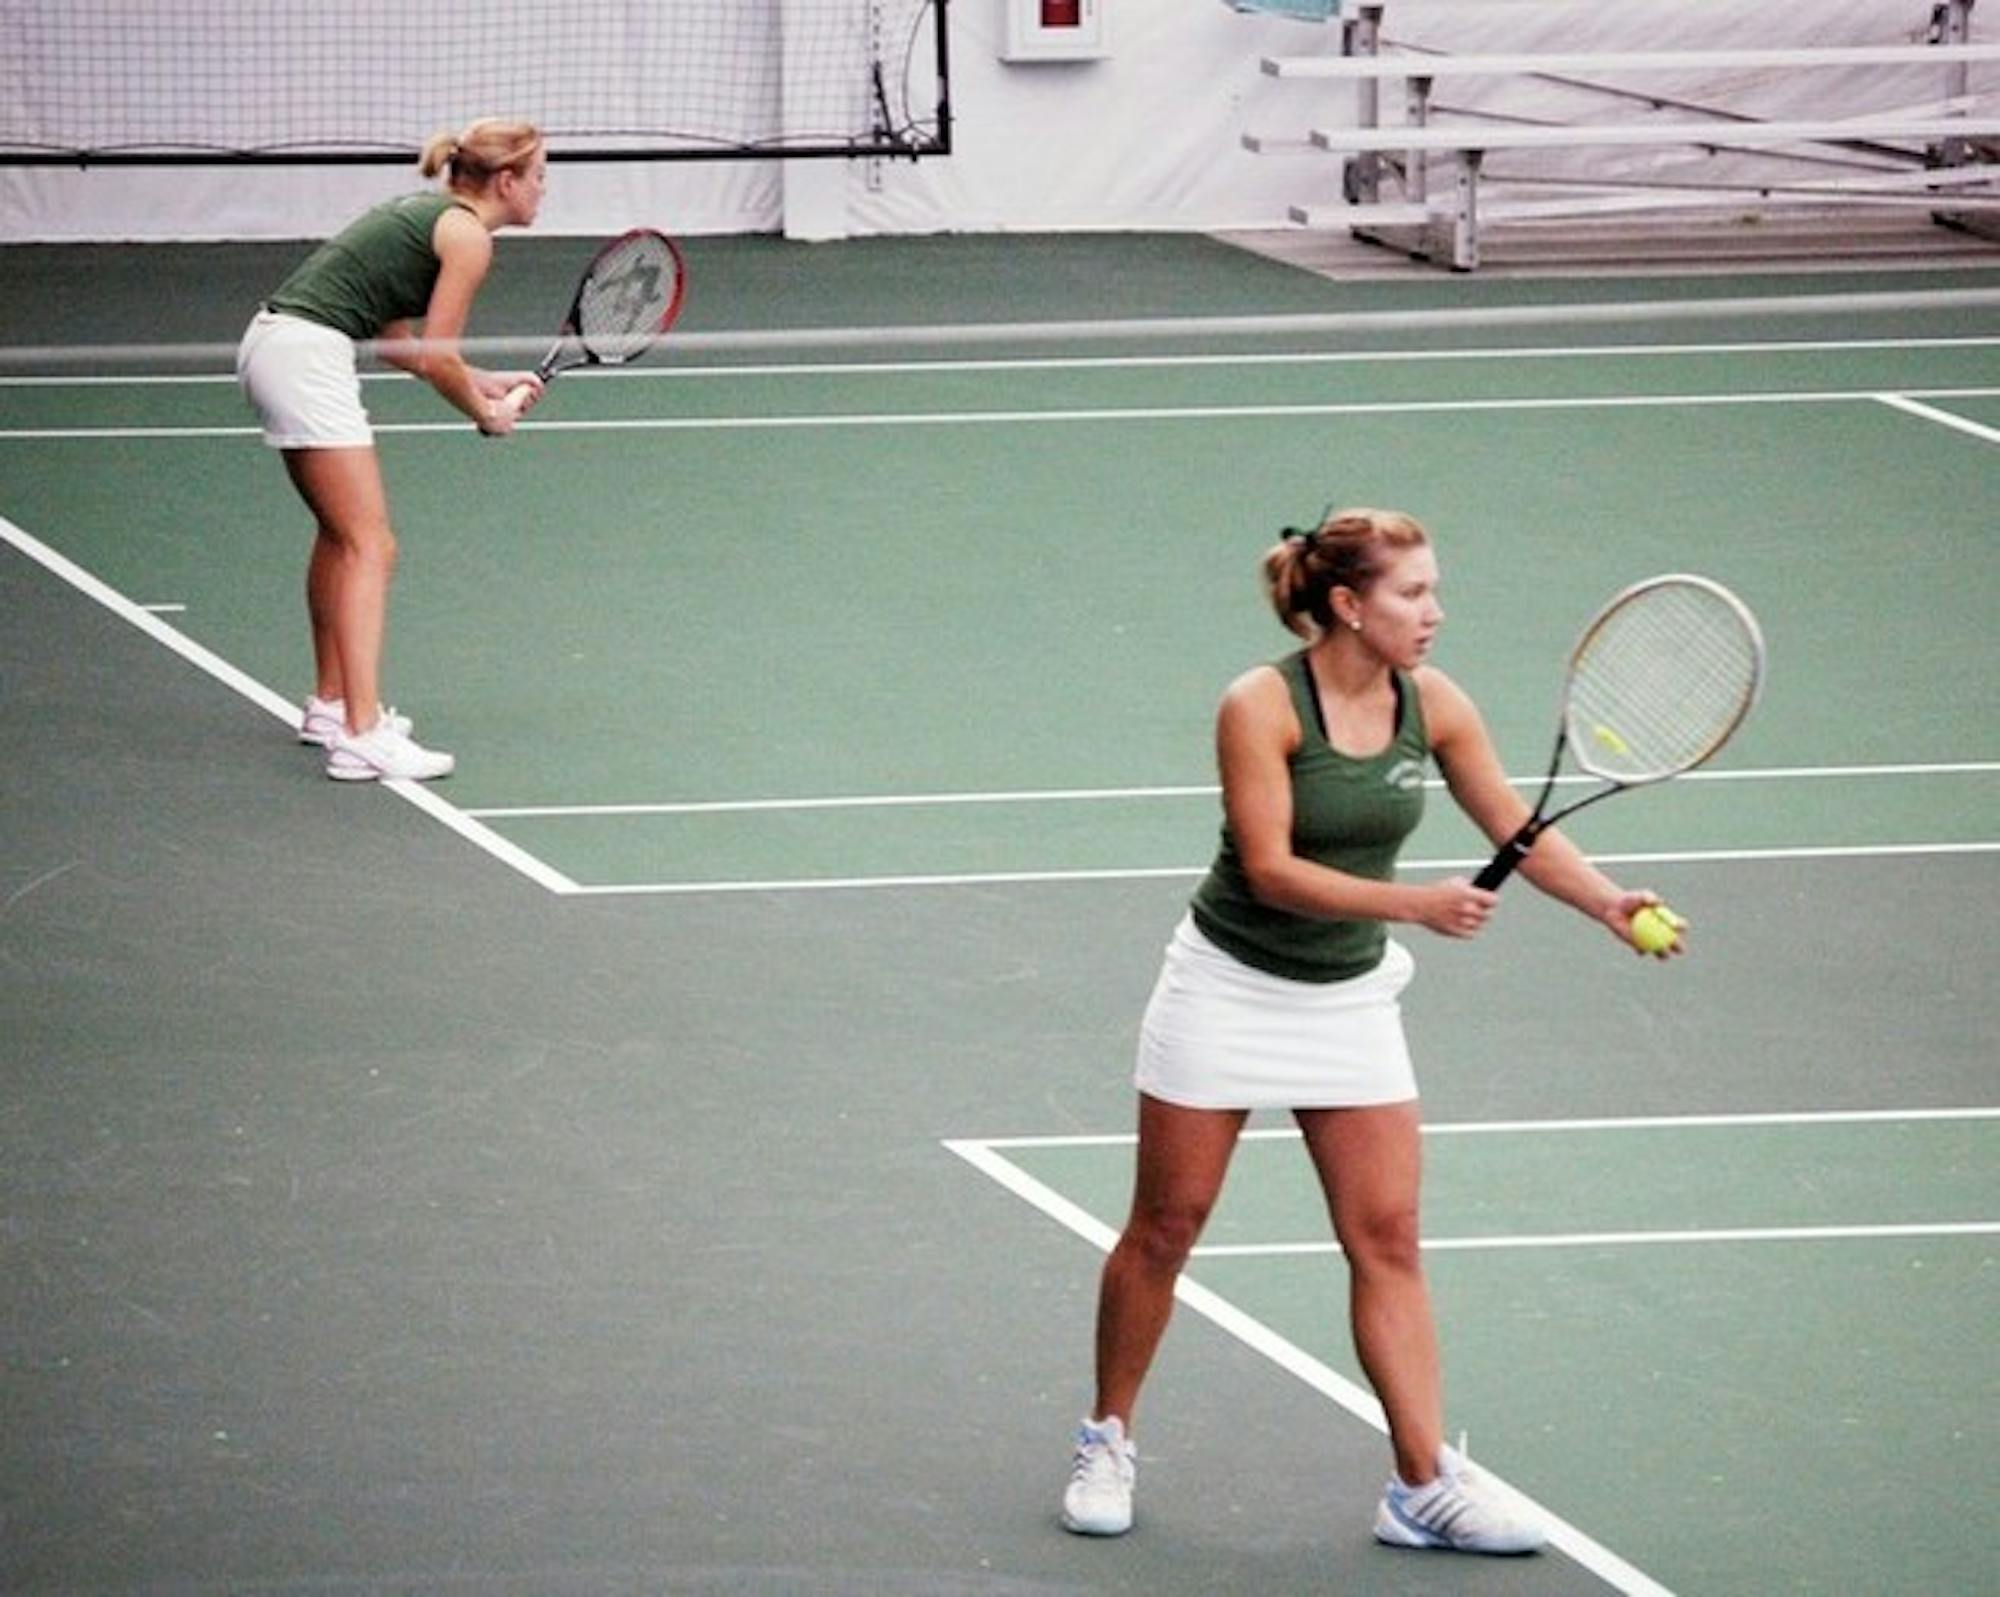 Kerry Snow '07 was perfect at No. 3 singles, posting straight-set wins over her Columbia and Cornell opponents.